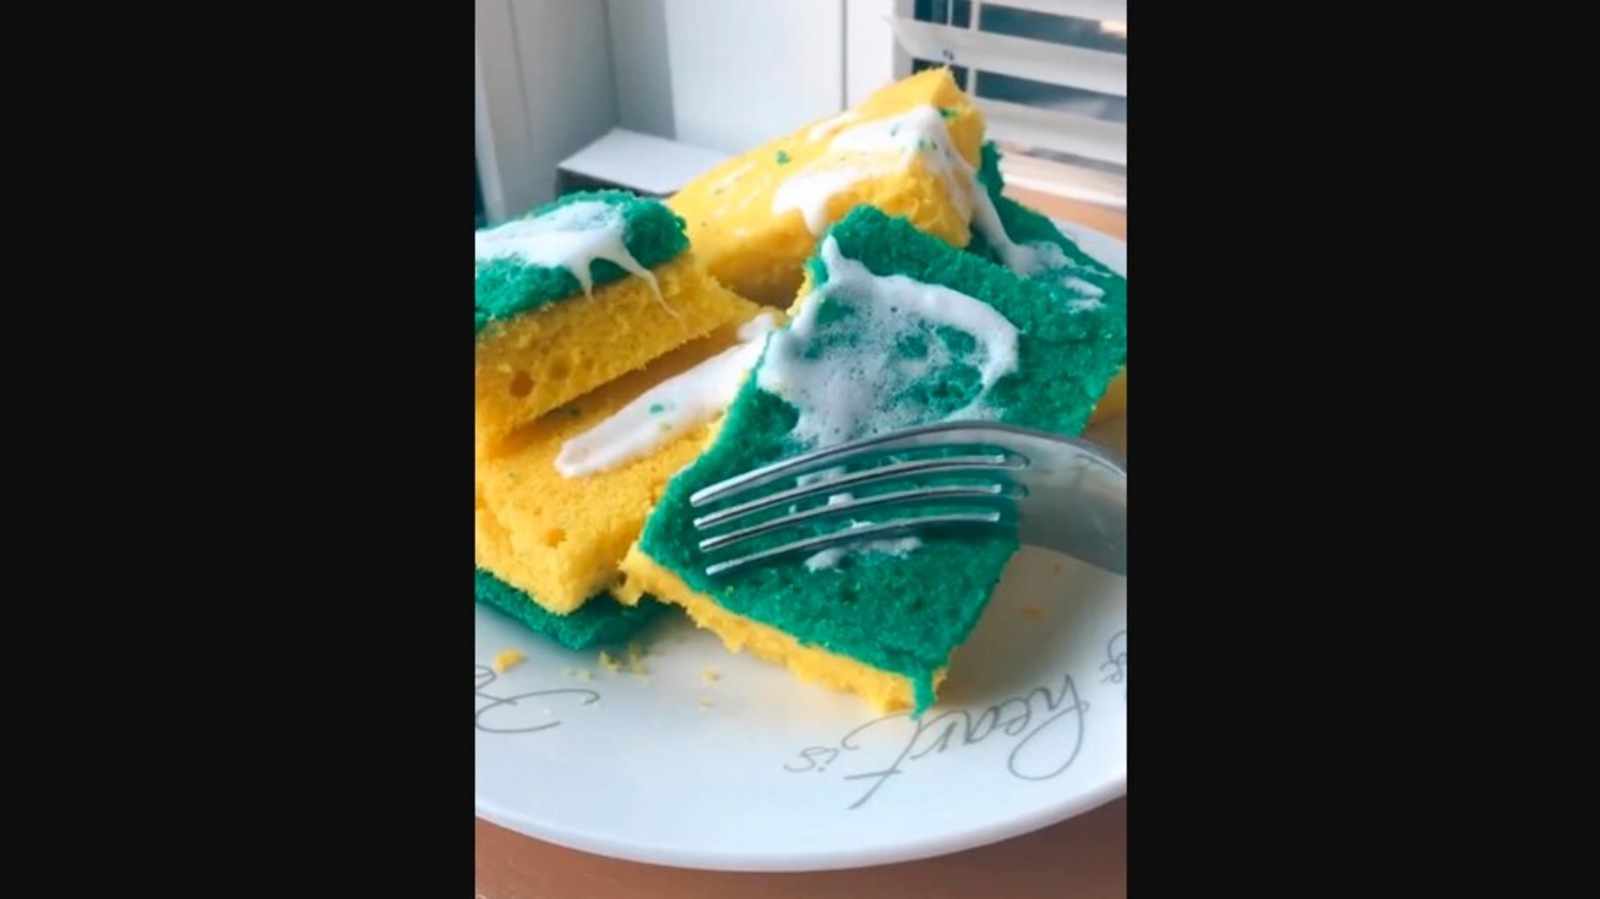 would-you-eat-this-cake-that-looks-like-a-pile-of-dishwashing-sponges